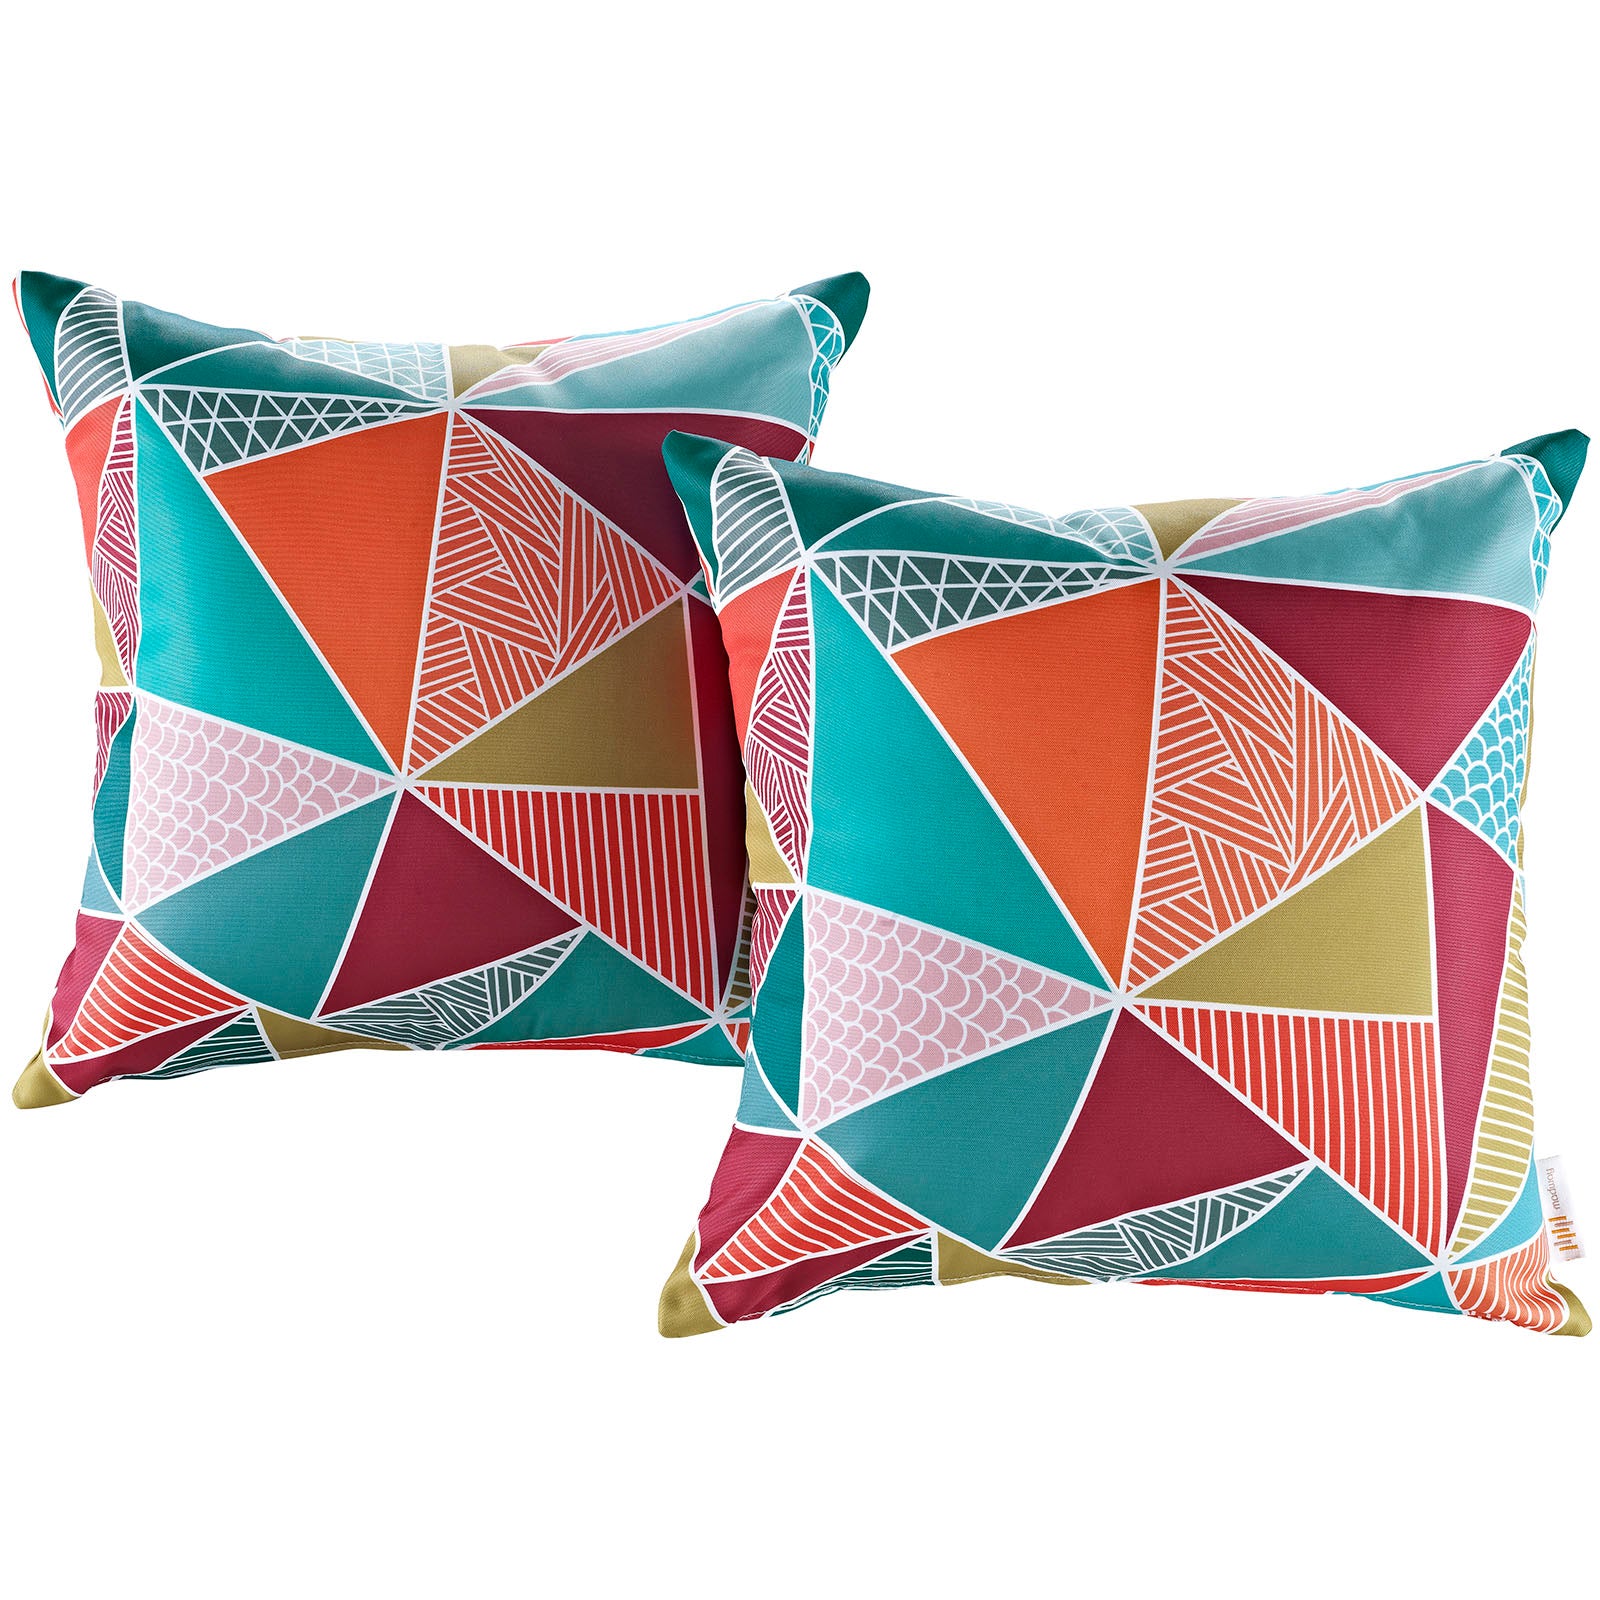 Modway Two Piece Outdoor Patio Pillow Set - East Shore Modern Home Furnishings